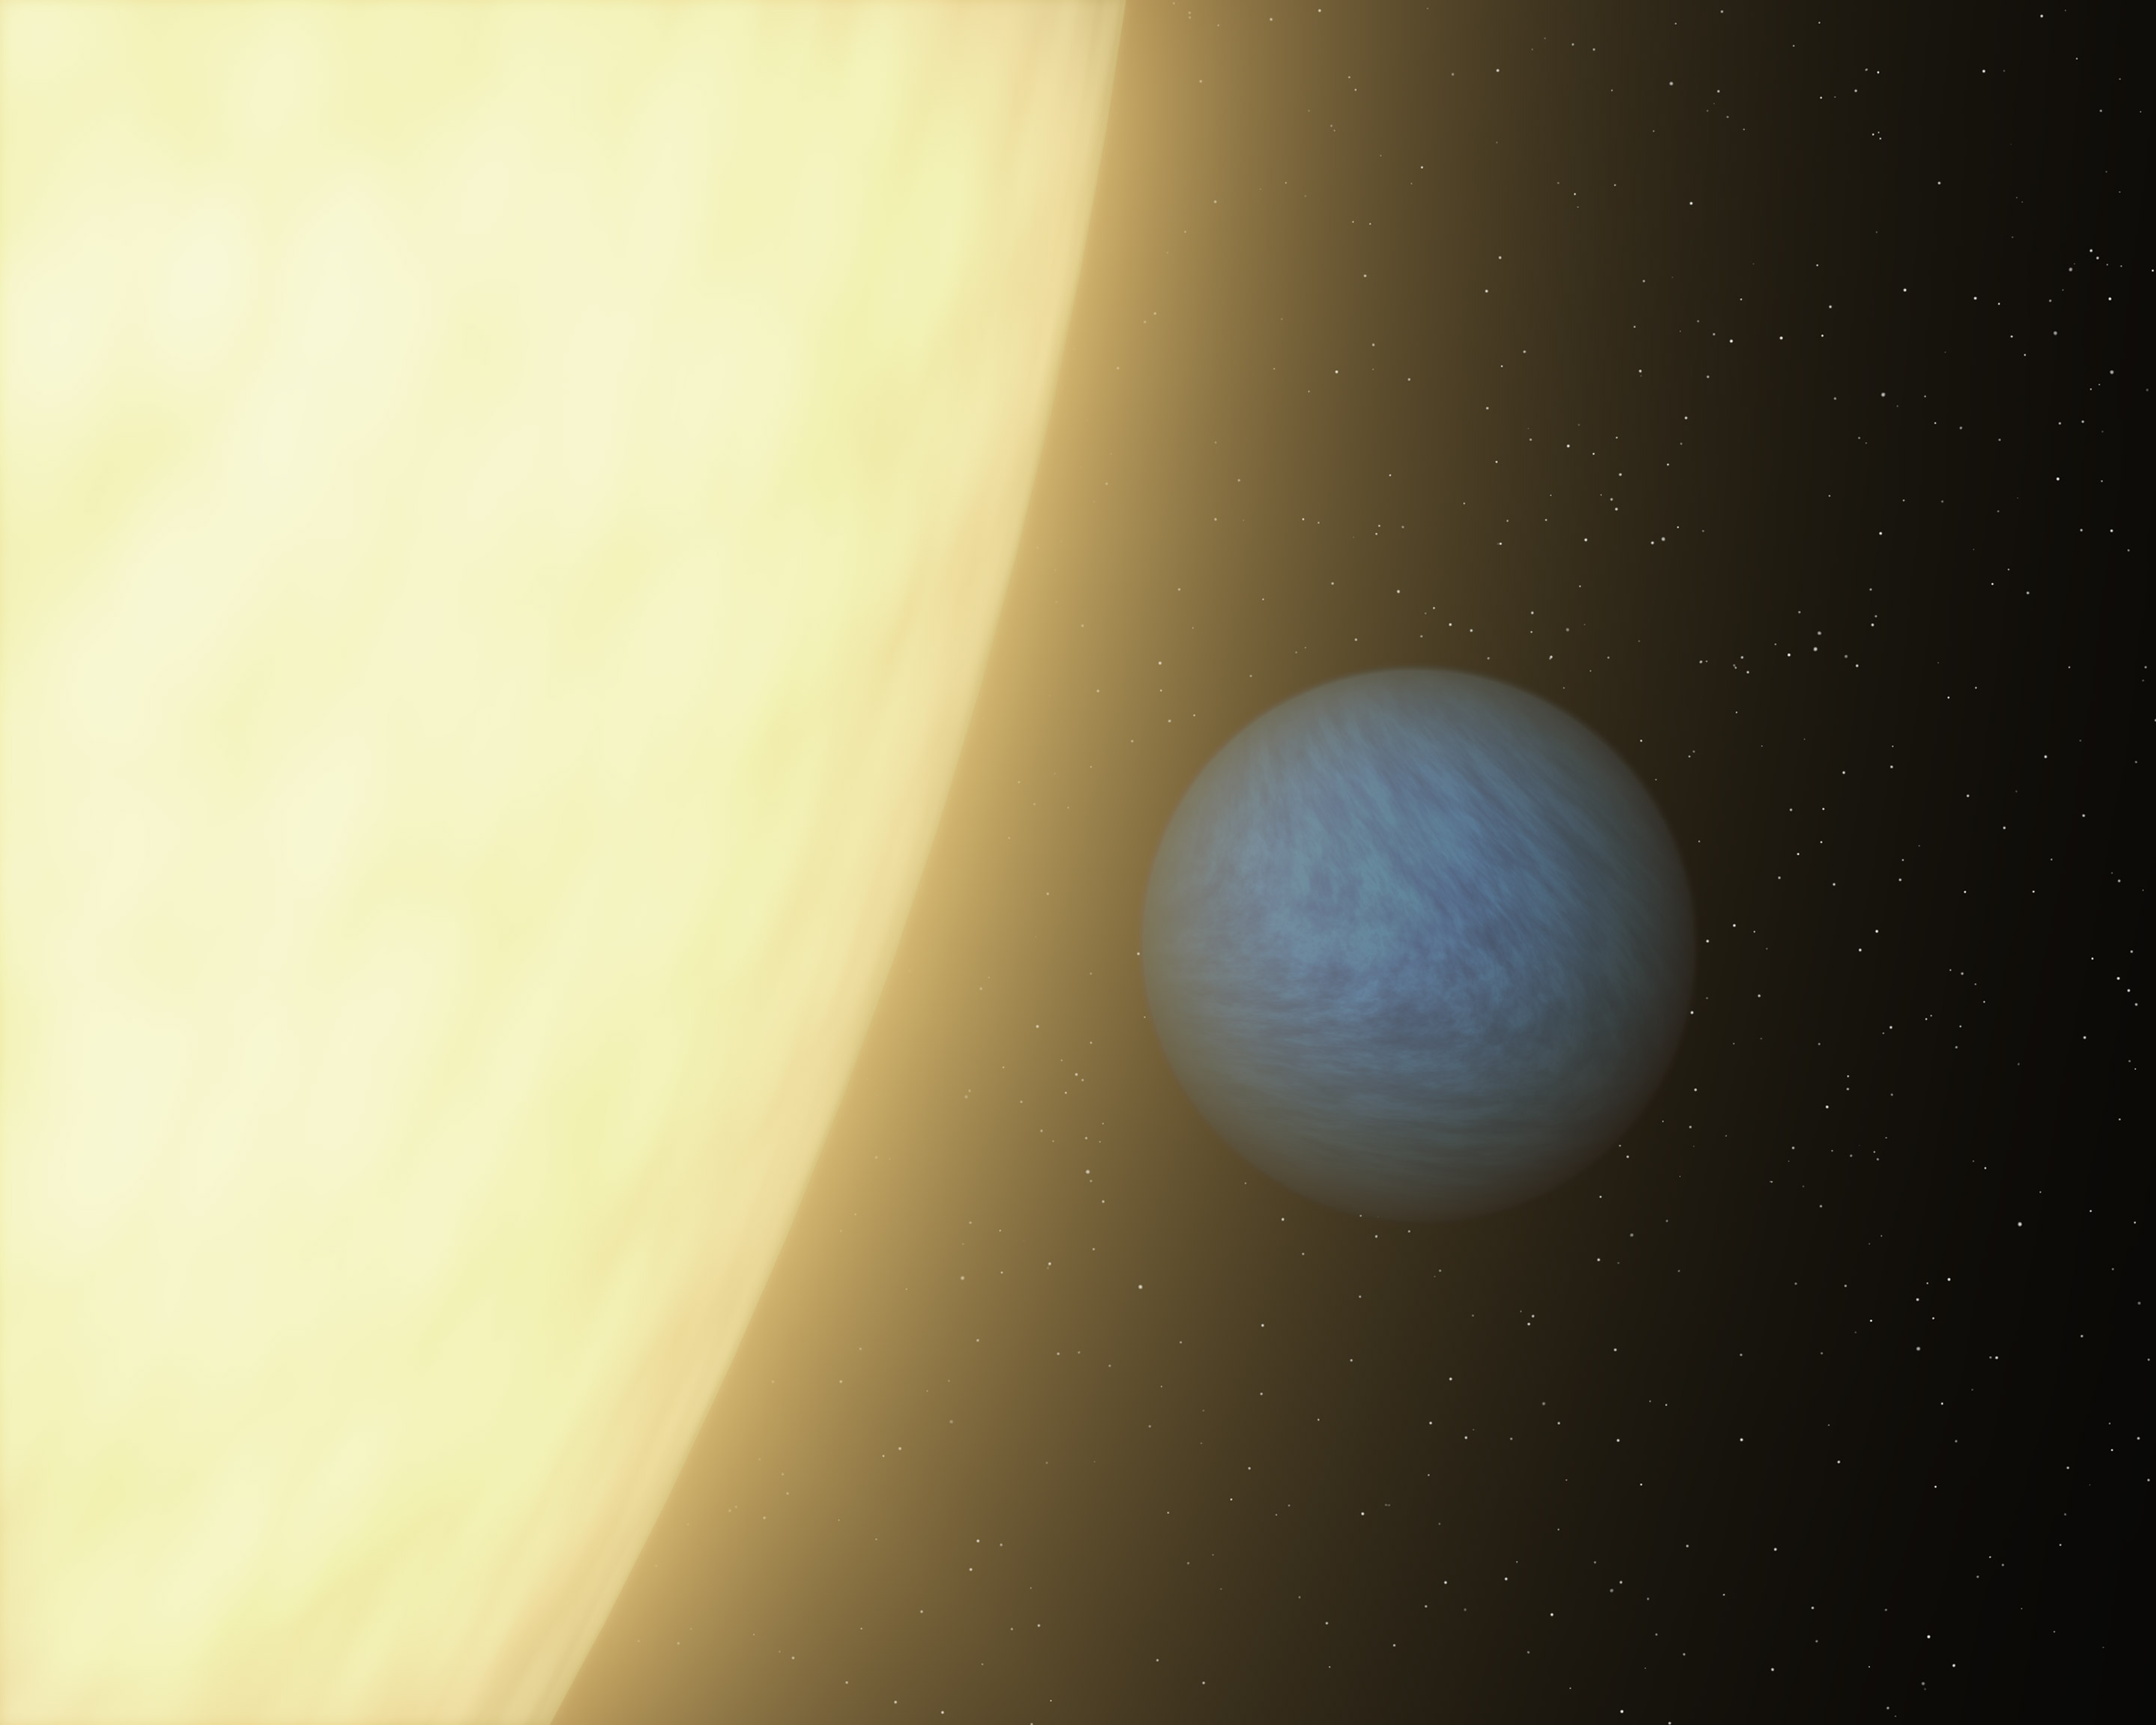 Spitzer was able to detect a super Earth’s direct light for the first time using its sensitive heat-seeking infrared vision. Seen here in this artist’s concept, the planet is called 55 Cancri e. Data revealed that it is very dark and that its sun-facing side is blistering hot at 3,140 degrees Fahrenheit. Image: NASA/JPL-Caltech